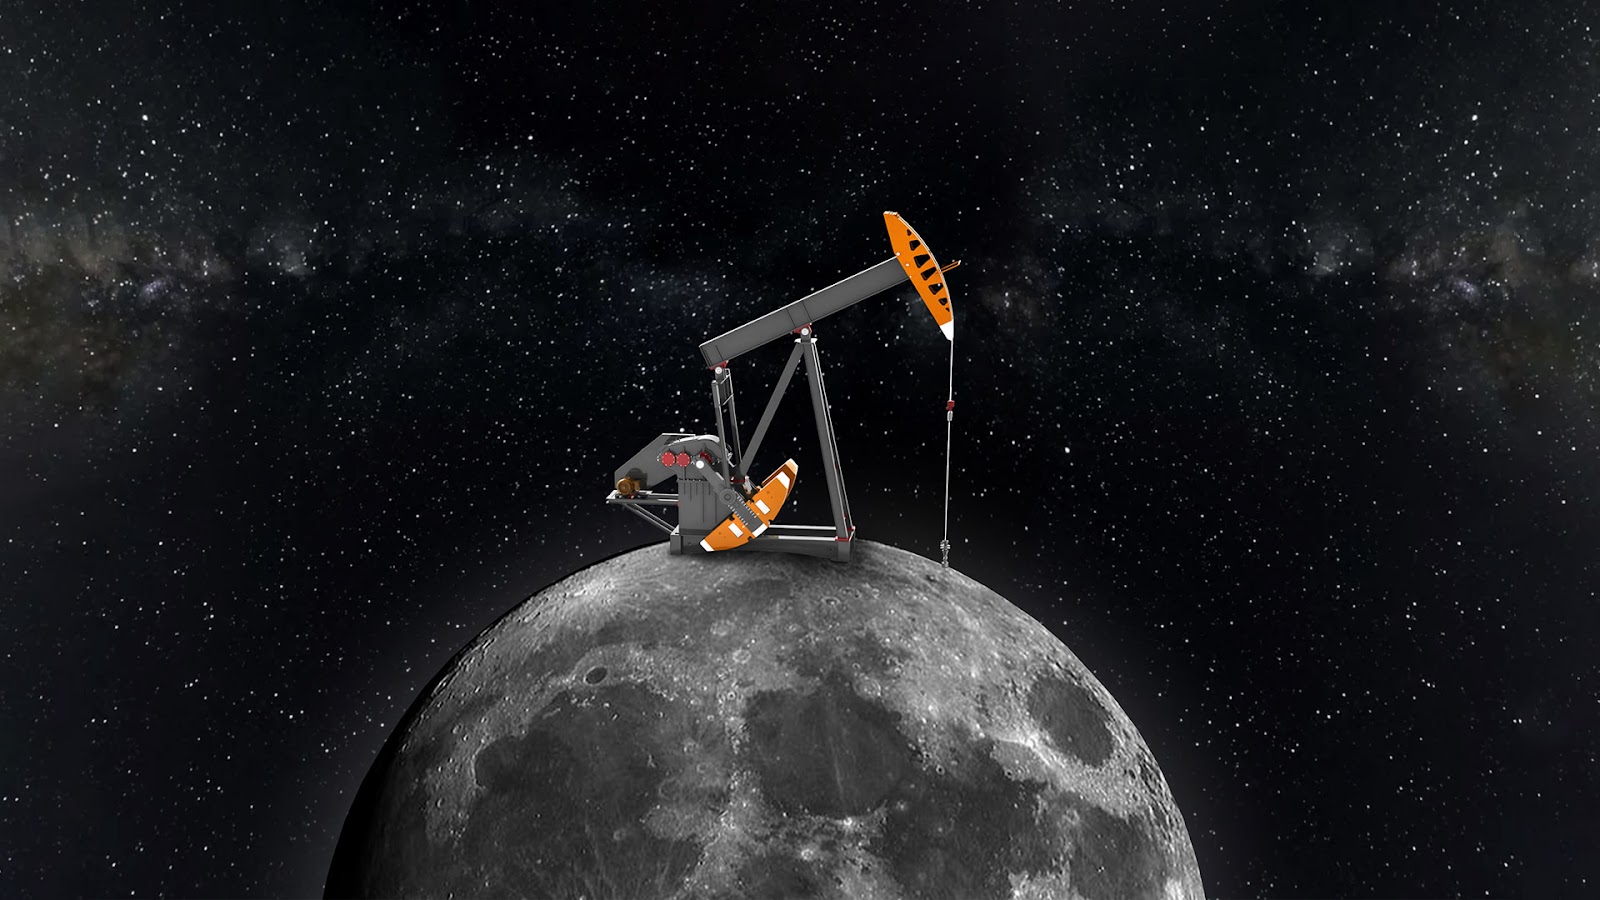 Illustration of an excavator sitting on top of the moon in space